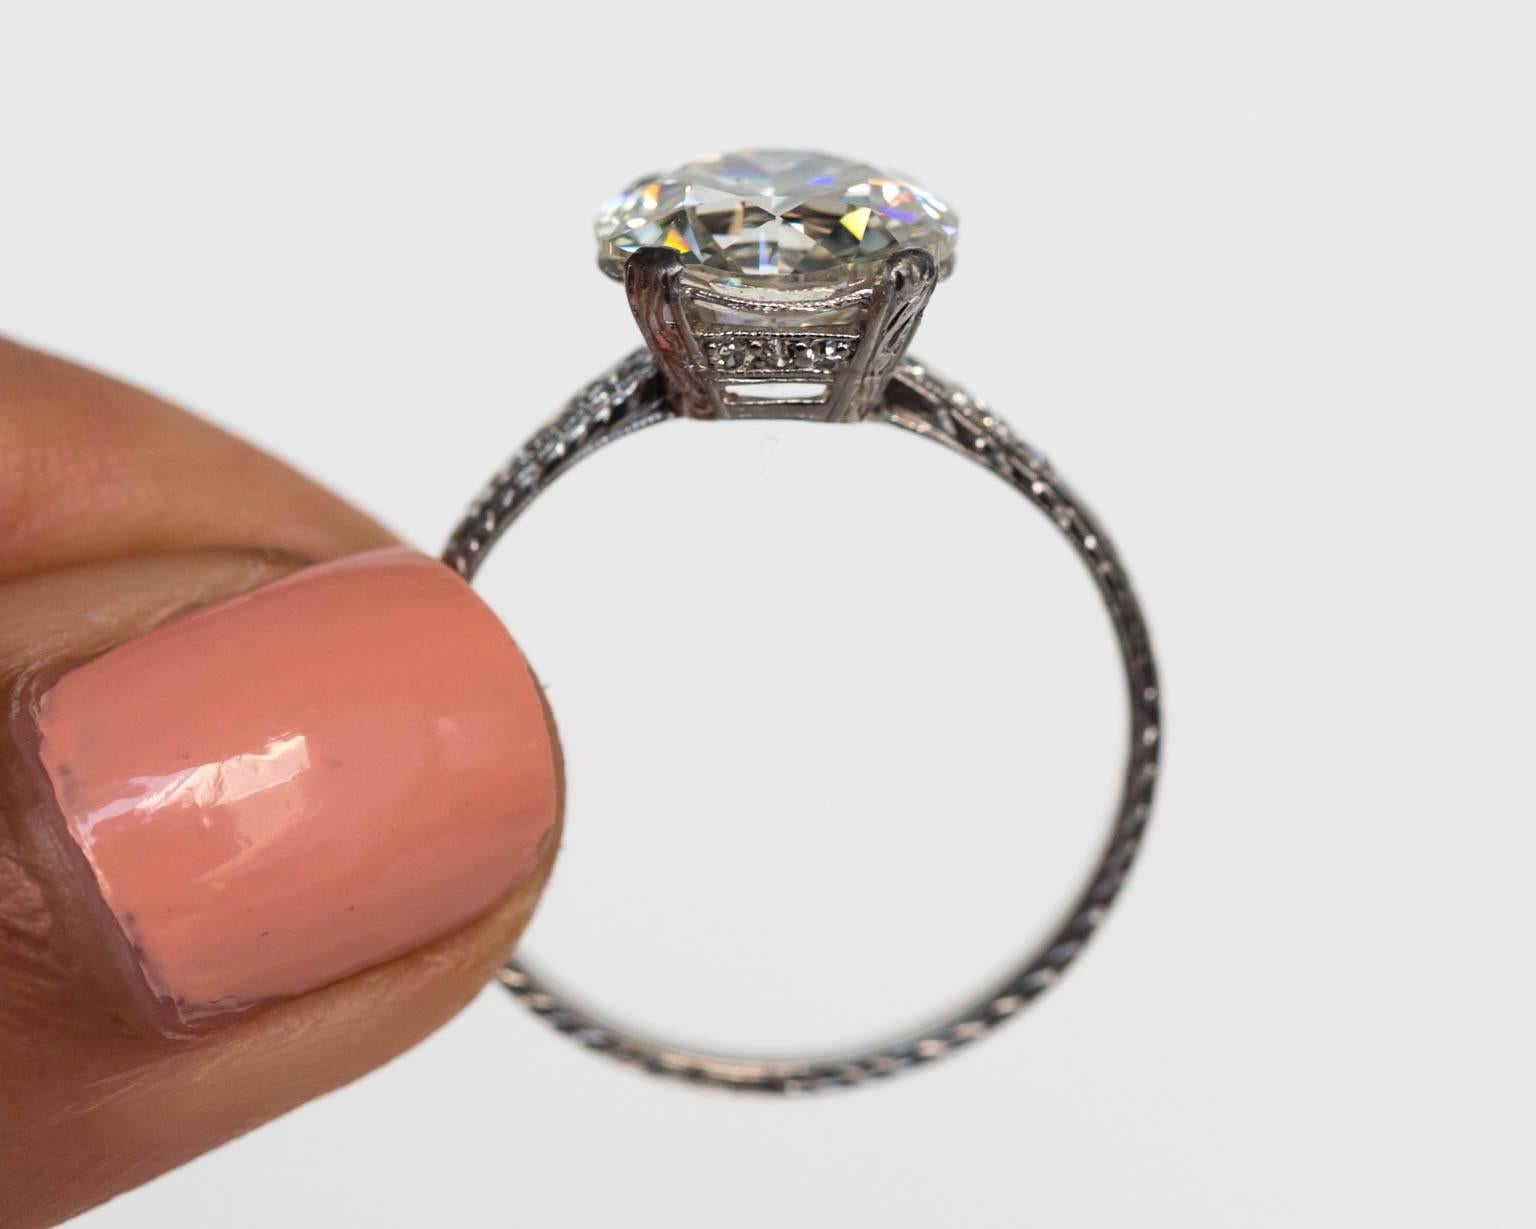 1910s Edwardian GIA 3.44 Carat Old European Diamond Platinum Engagement Ring. The center diamond is one of the absolutely most beautiful old european cut diamonds we have seen. The size is massive! The culet is large, something we LOVE in our old